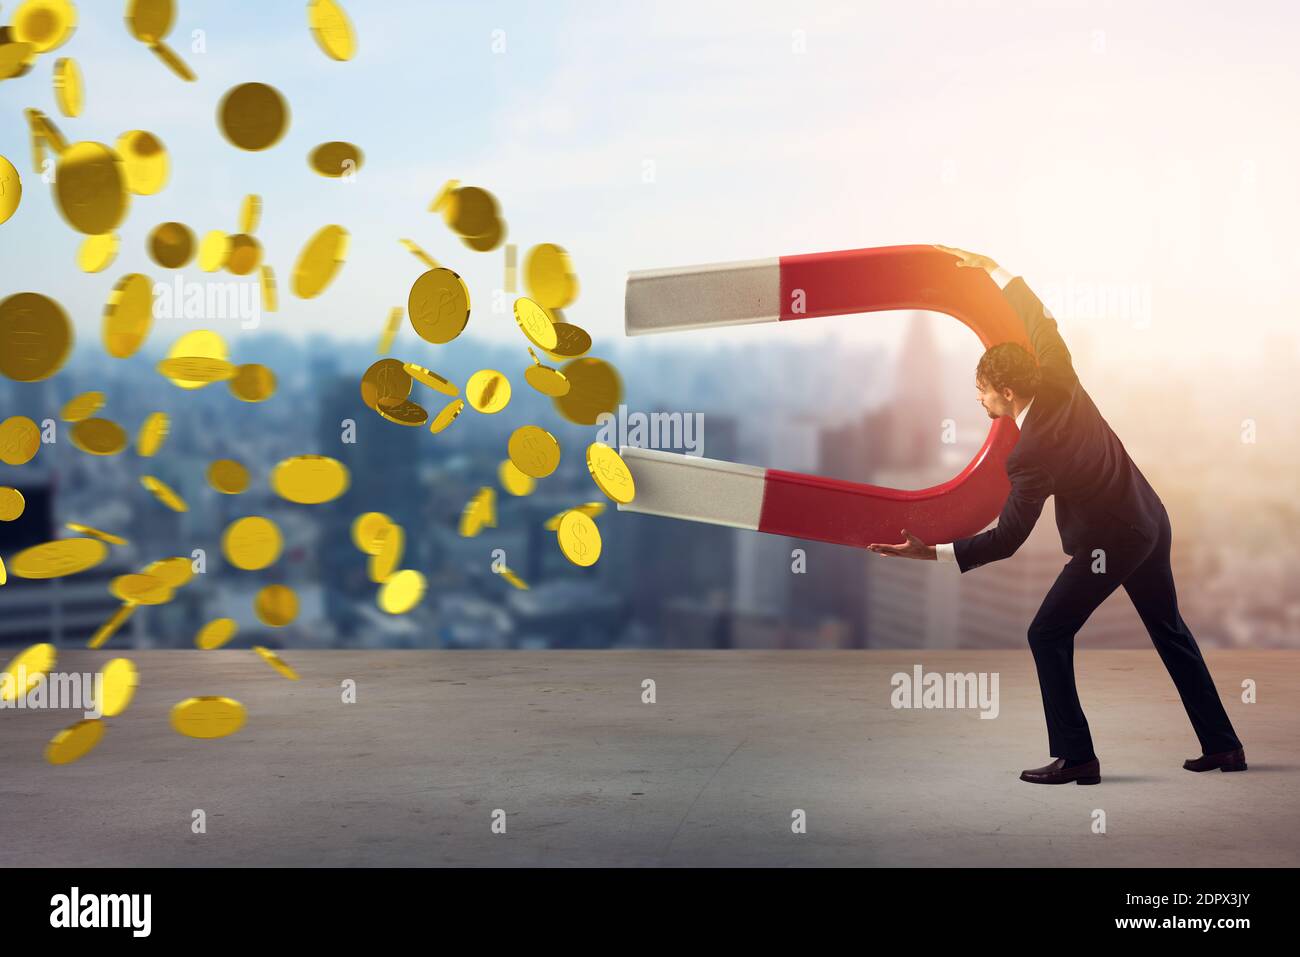 Businessman captures money with a big magnet. concept of earning success. Stock Photo